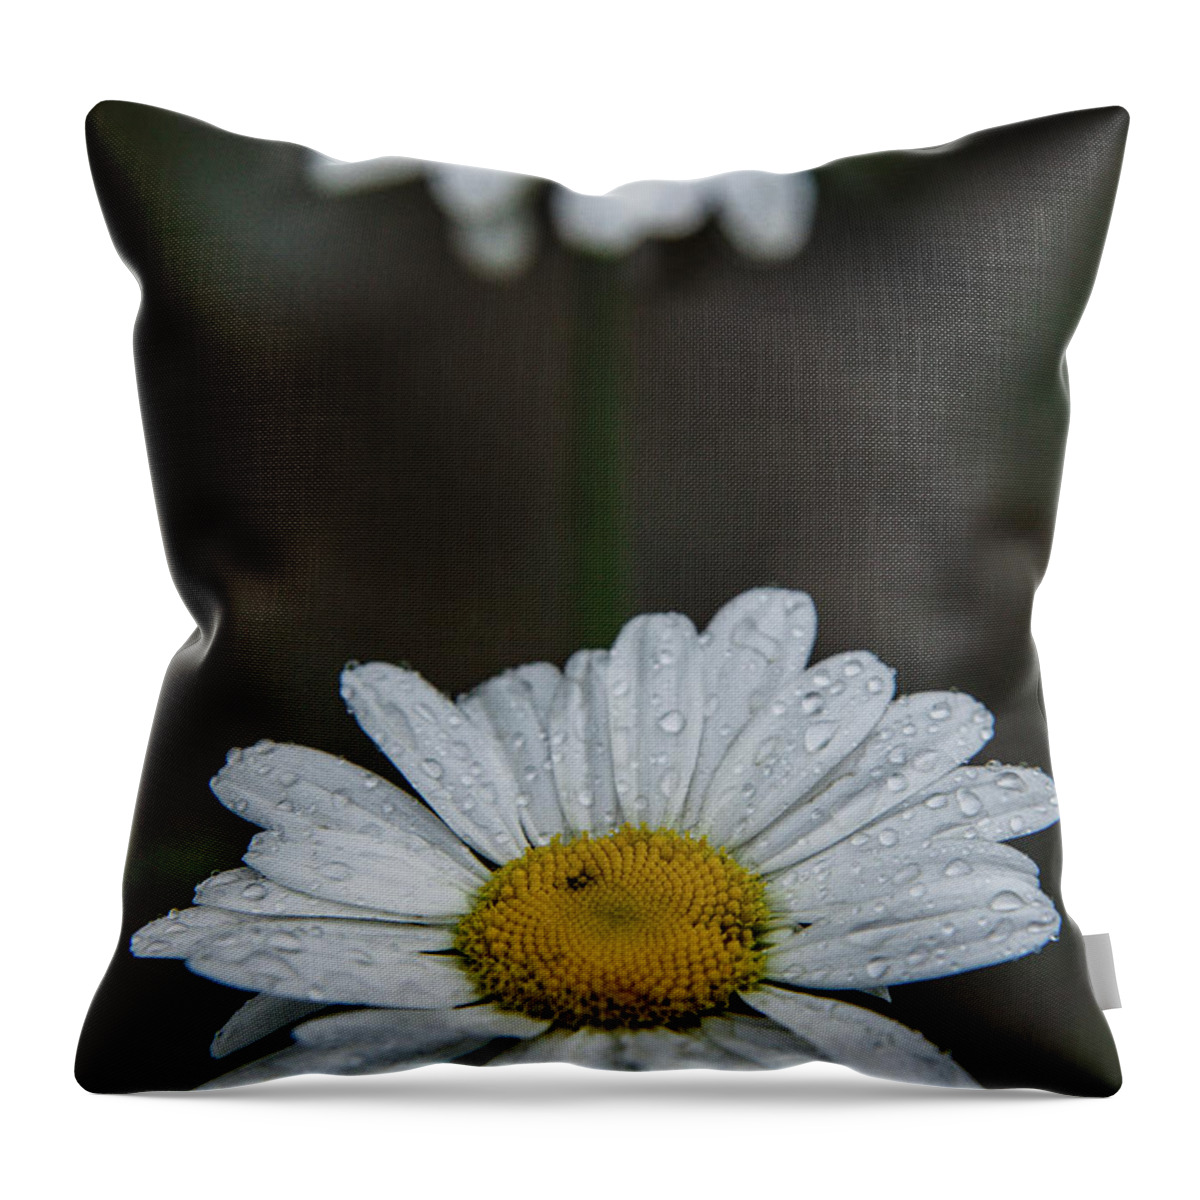 Nature Throw Pillow featuring the photograph Flower 2 by Mati Krimerman